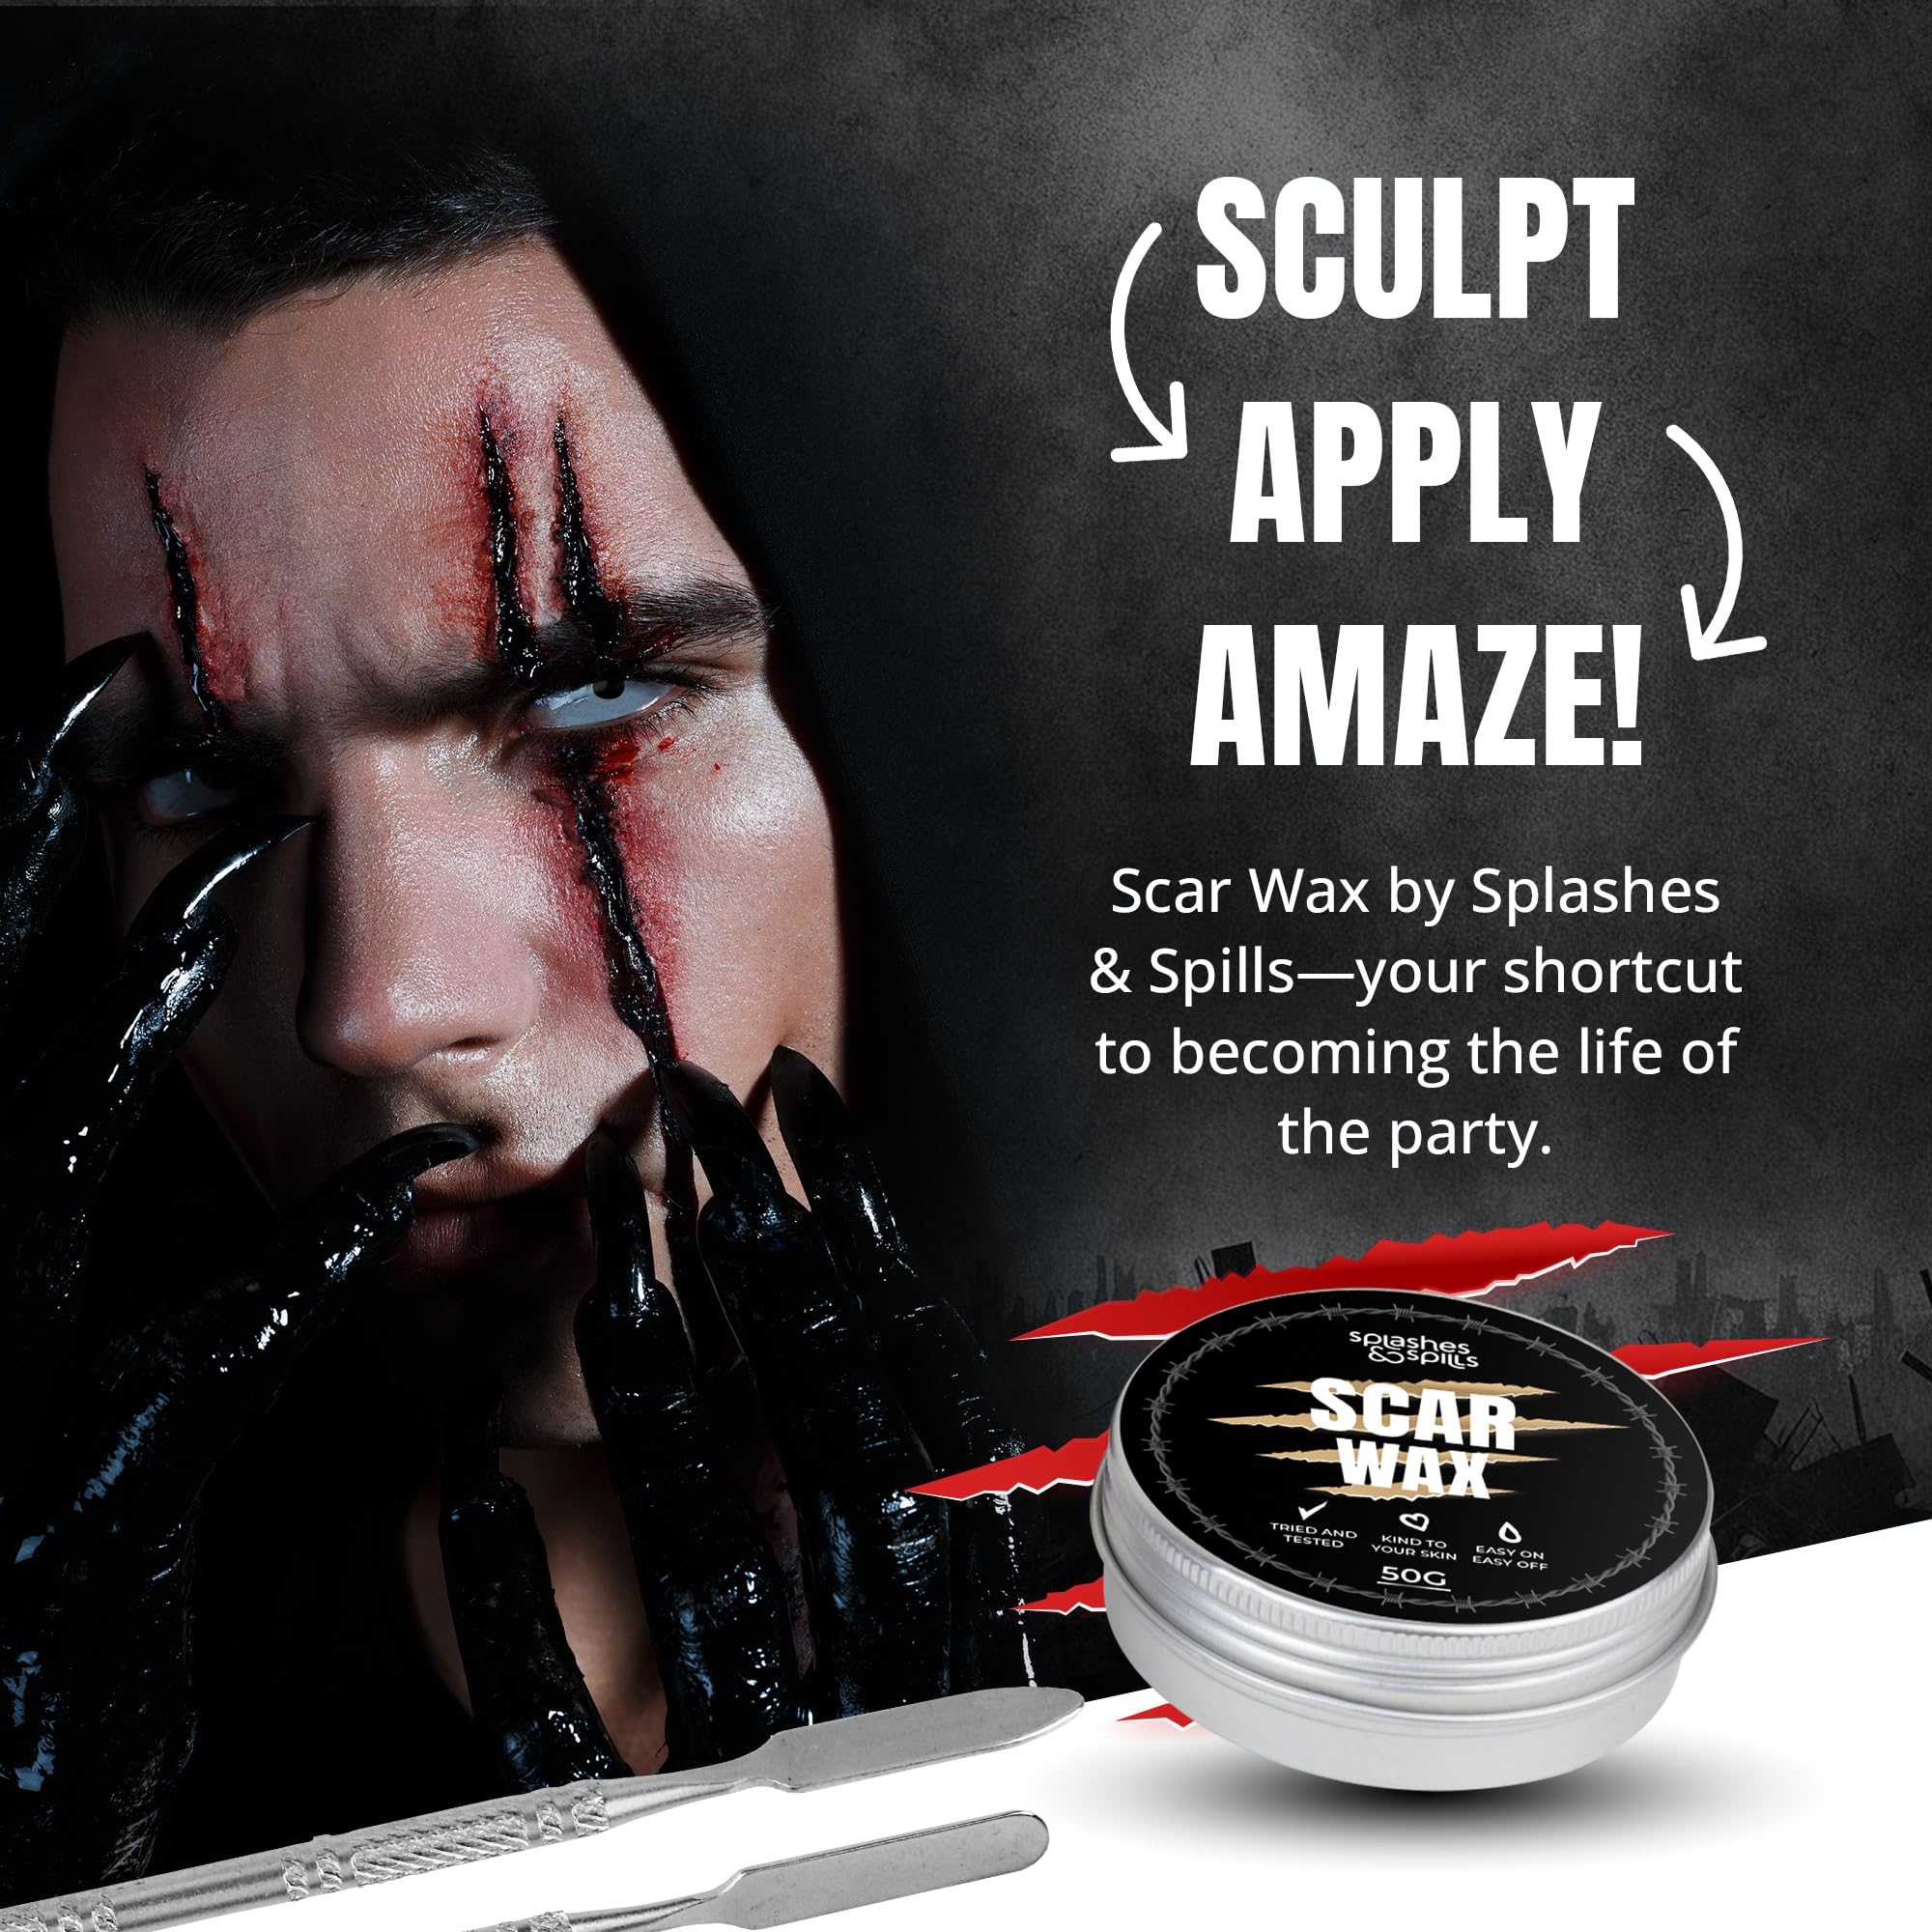 Professional Grade Scar Wax - SFX Makeup Kit for Halloween Prosthetics, Cosplay and Theatre Productions - Cruelty-Free & Vegan-Friendly Fake Scar Special Effects Makeup - 50g - Splashes & Spills